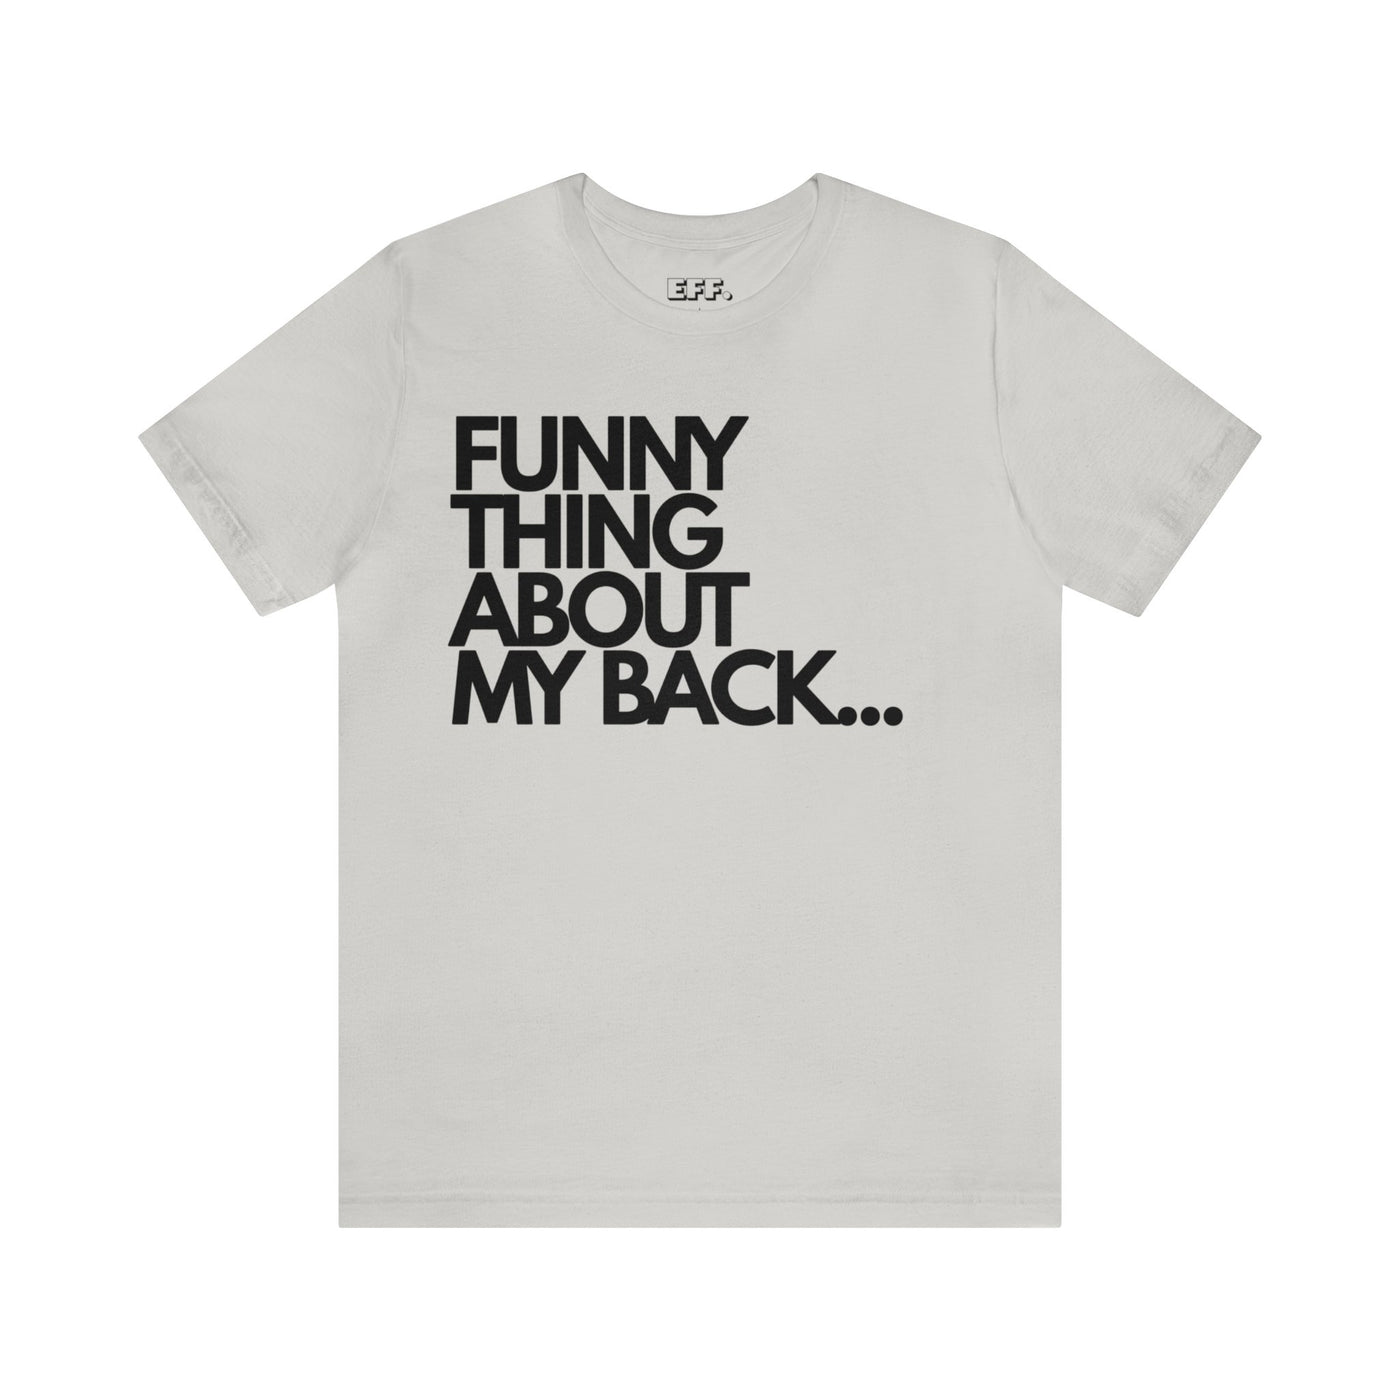 Funny Thing About My Back...